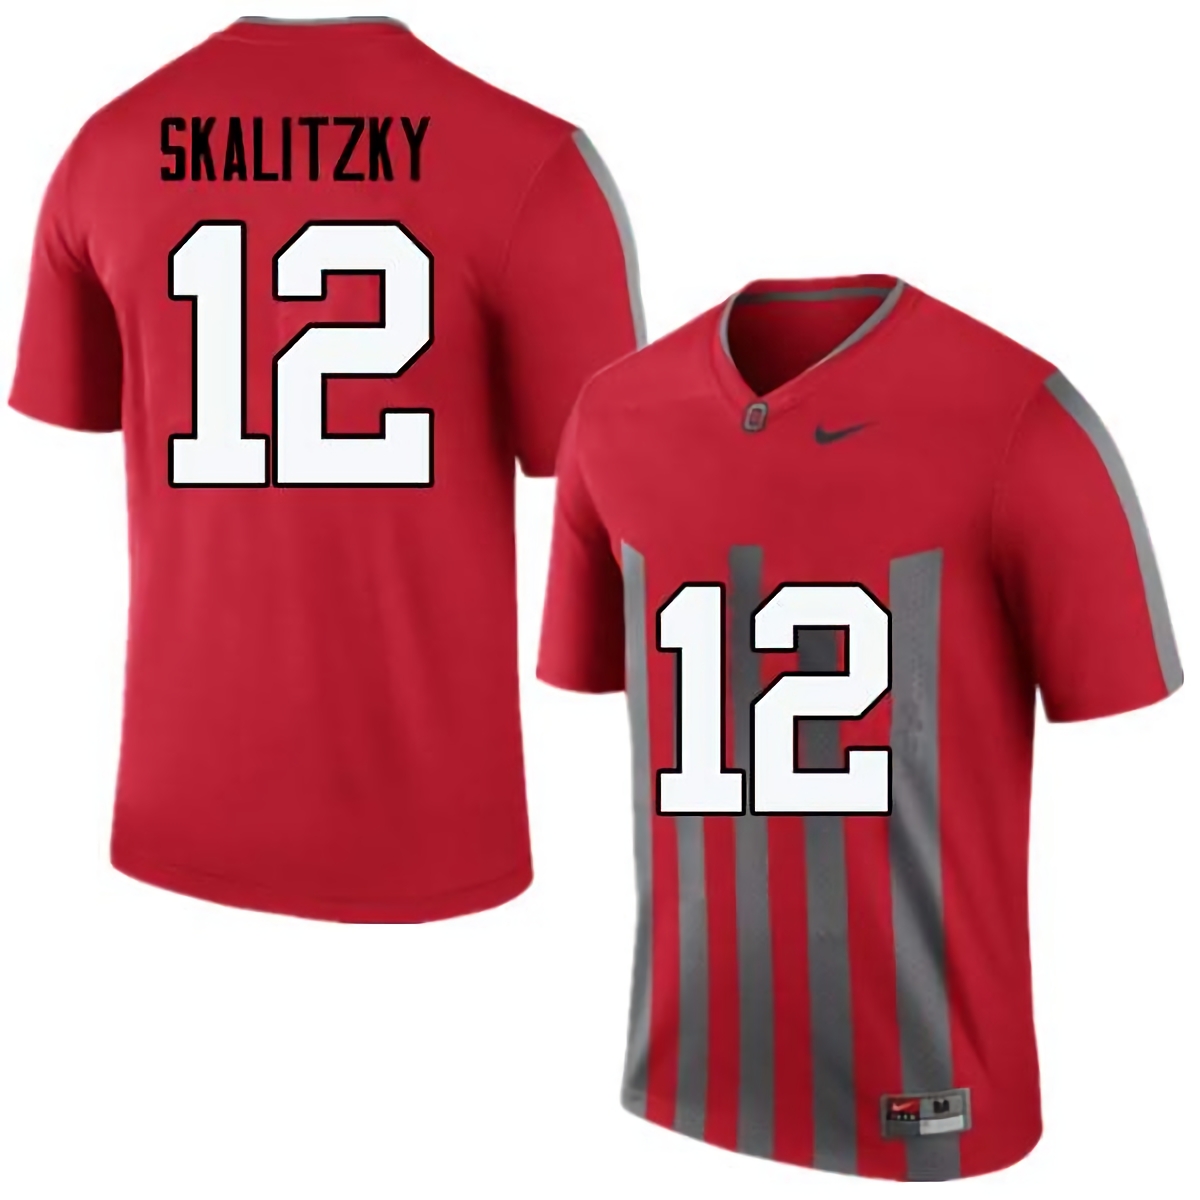 Brendan Skalitzky Ohio State Buckeyes Men's NCAA #12 Nike Throwback Red College Stitched Football Jersey IIQ1556CV